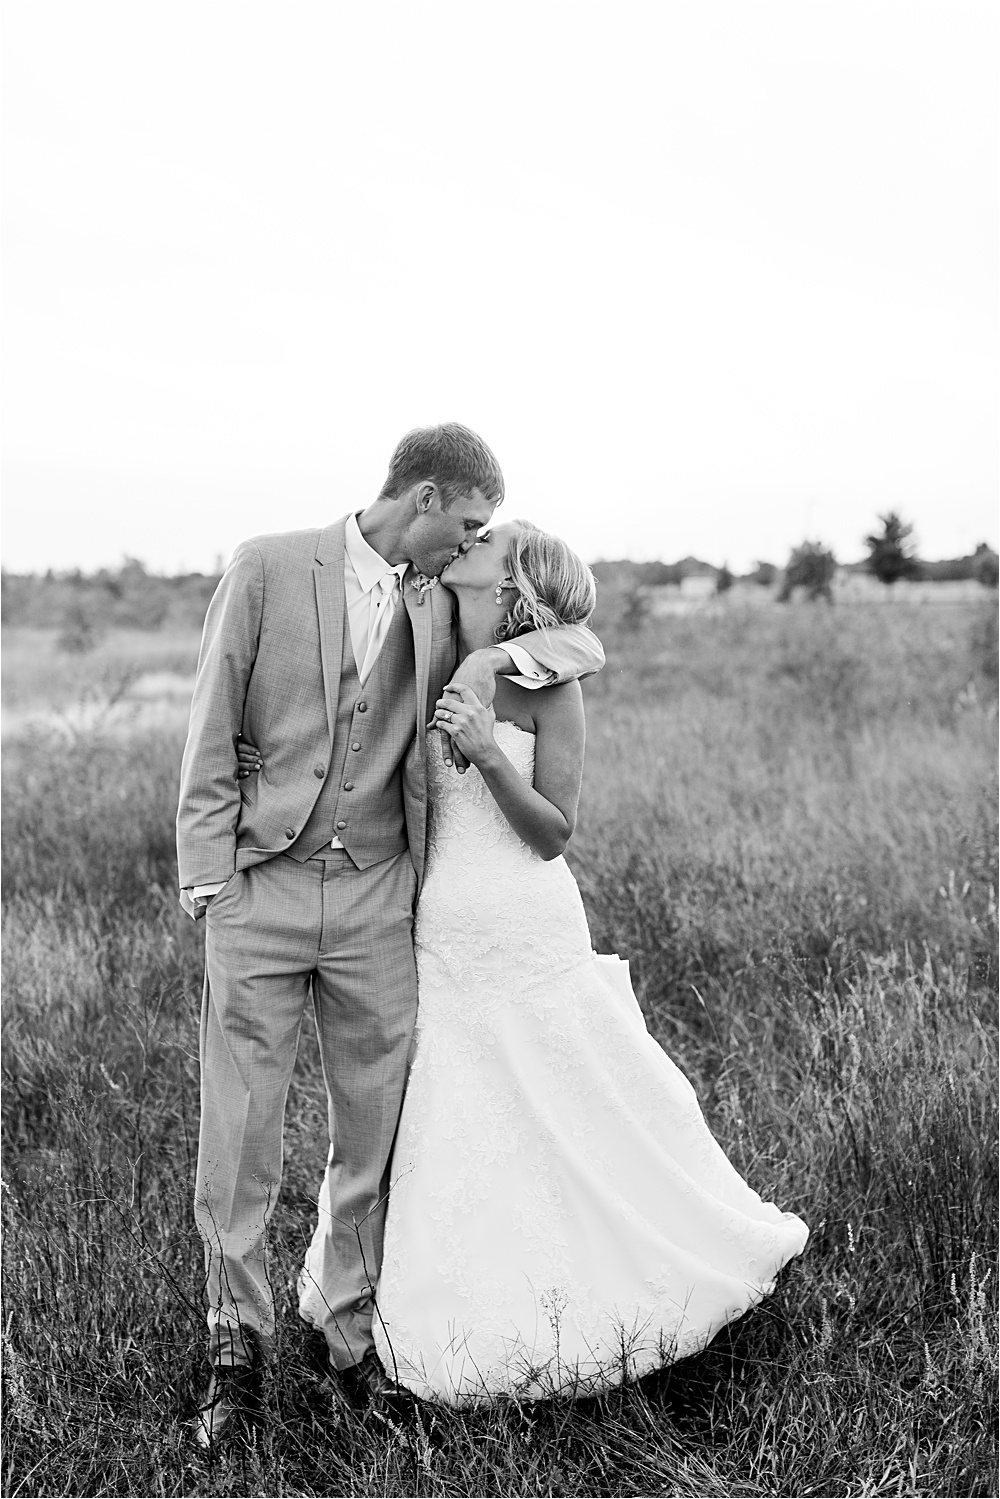 Bride and groom sunset portrait outside in field at Minnesota summer wedding in Buffalo MN photographed by Mallory Kiesow, Minnesota wedding photographer